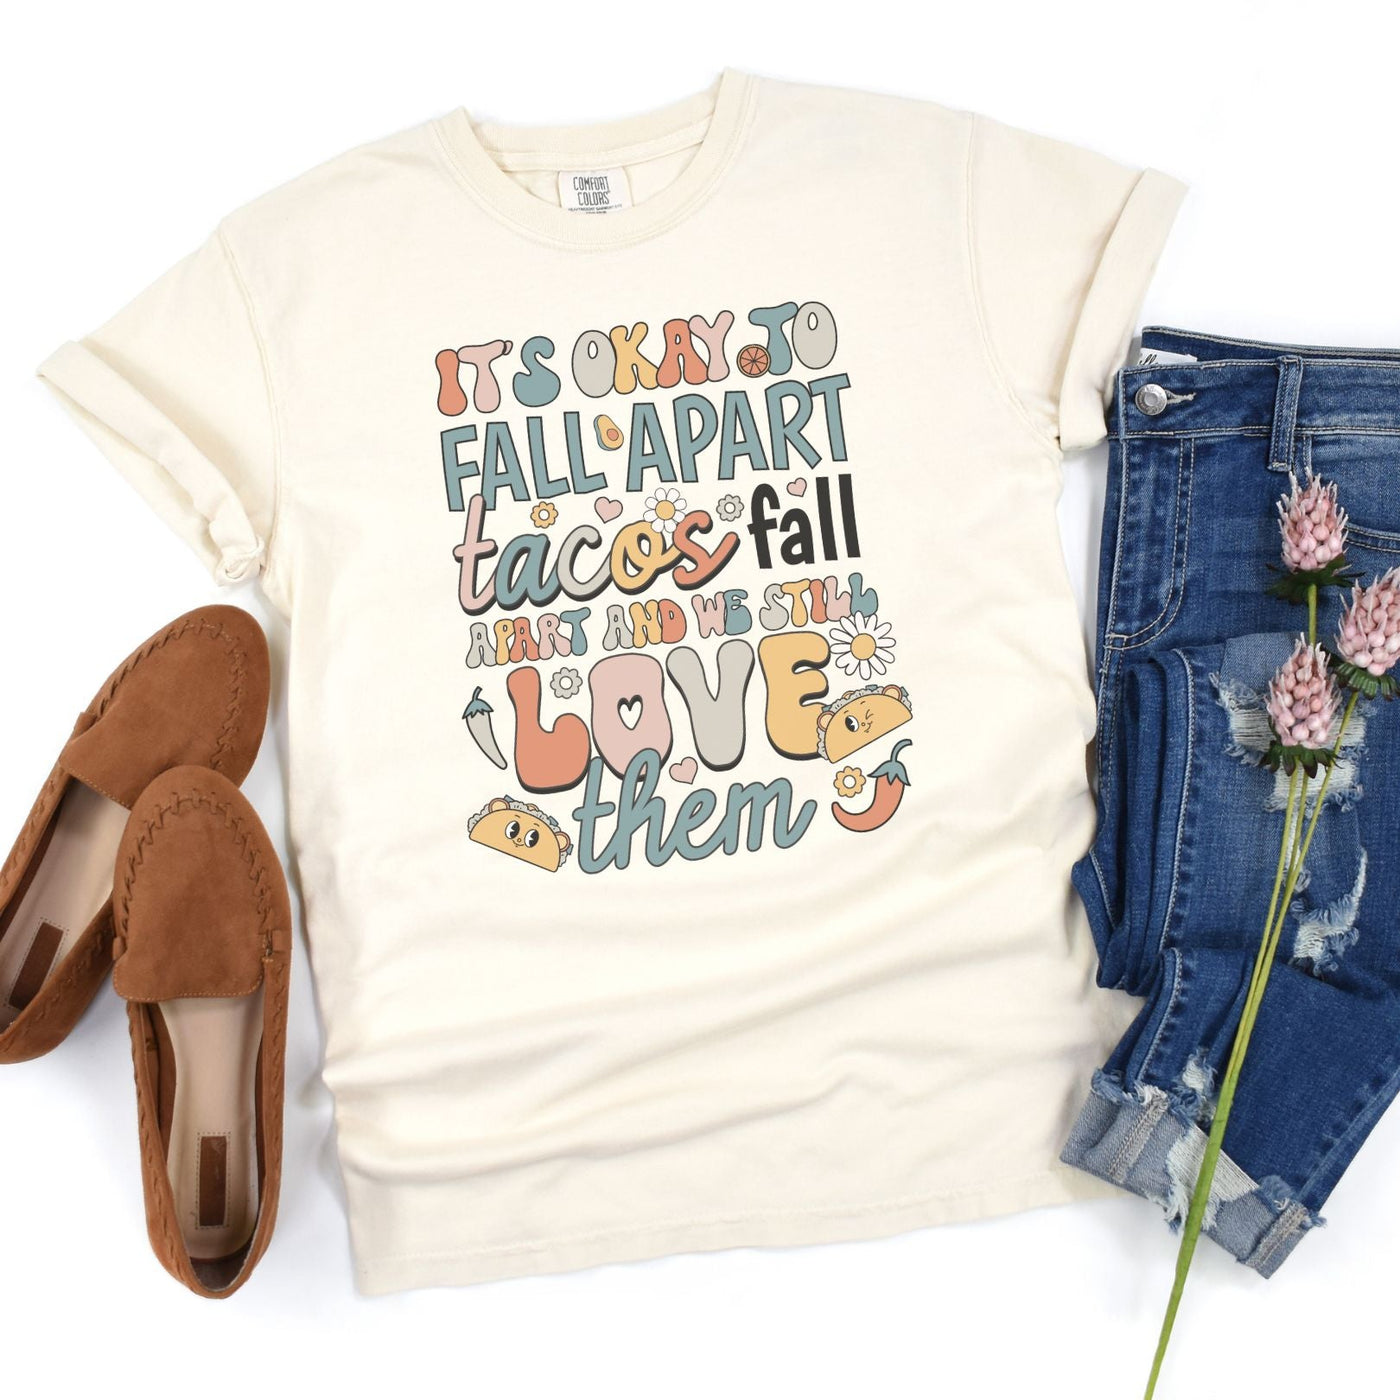 PREORDER: Tacos Fall Apart Graphic Tee-Womens-Ave Shops-Market Street Nest, Fashionable Clothing, Shoes and Home Décor Located in Mabank, TX